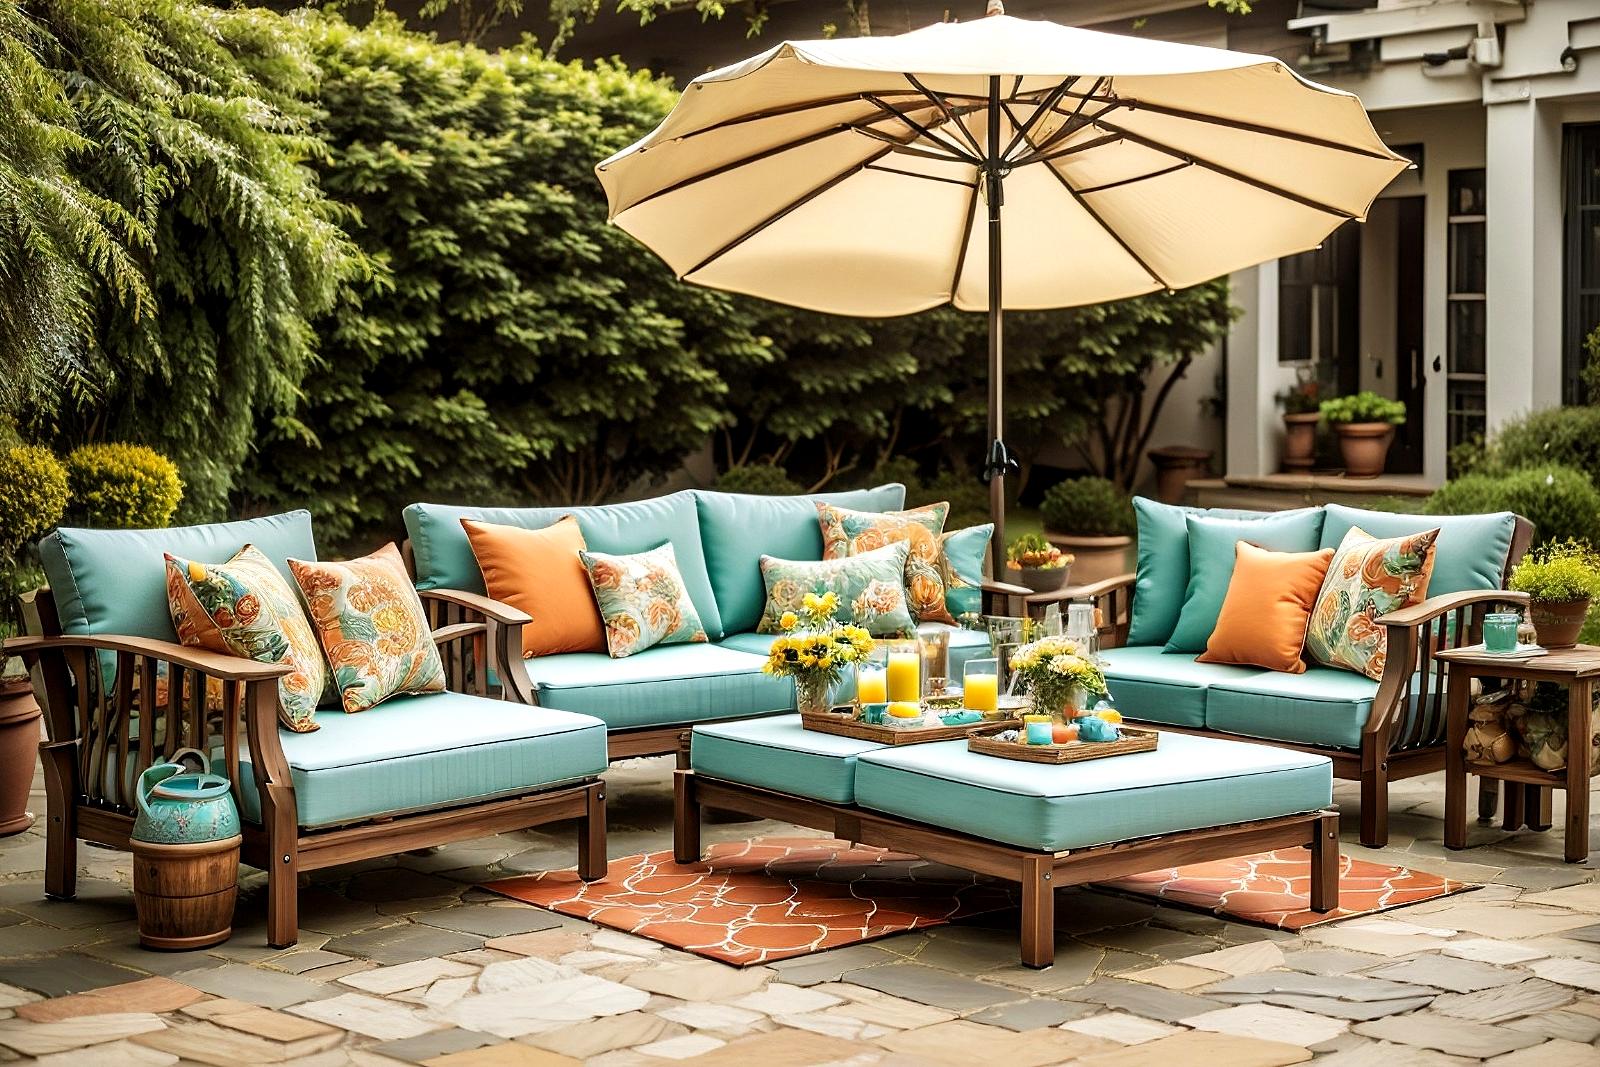 Outdoor Patio Furniture Search